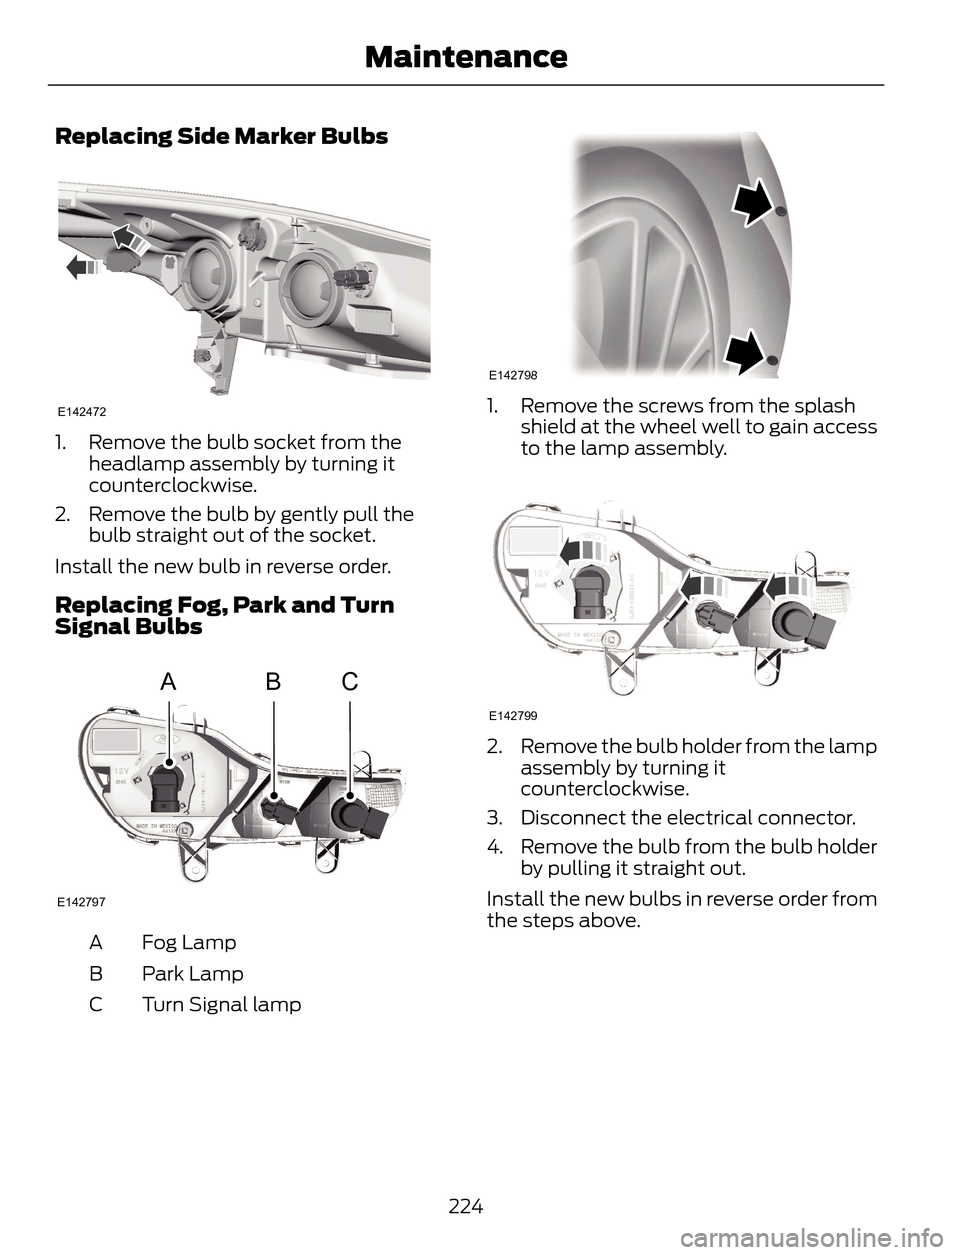 FORD ESCAPE 2014 3.G Owners Manual Replacing Side Marker Bulbs
E142472
1. Remove the bulb socket from the
headlamp assembly by turning it
counterclockwise.
2. Remove the bulb by gently pull the
bulb straight out of the socket.
Install 